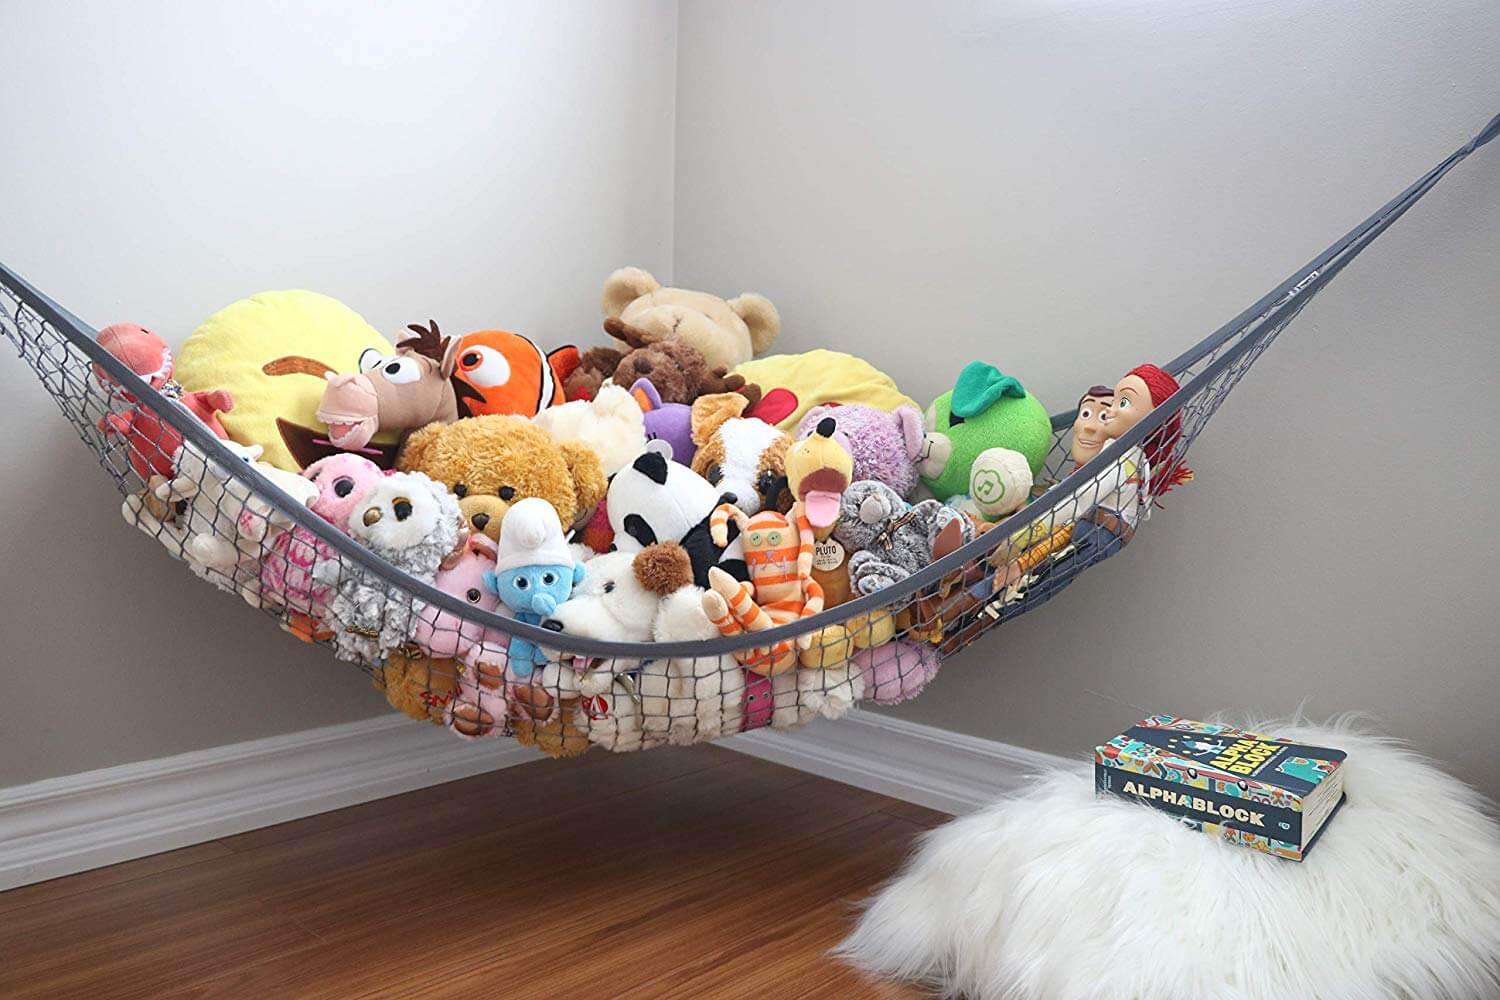 Hanging Net for Stuffed Animal Storage or Playroom Organization Decorative Wall Corner Toy Storage for Kids Room MiniOwls Toy Hammock Pink Large